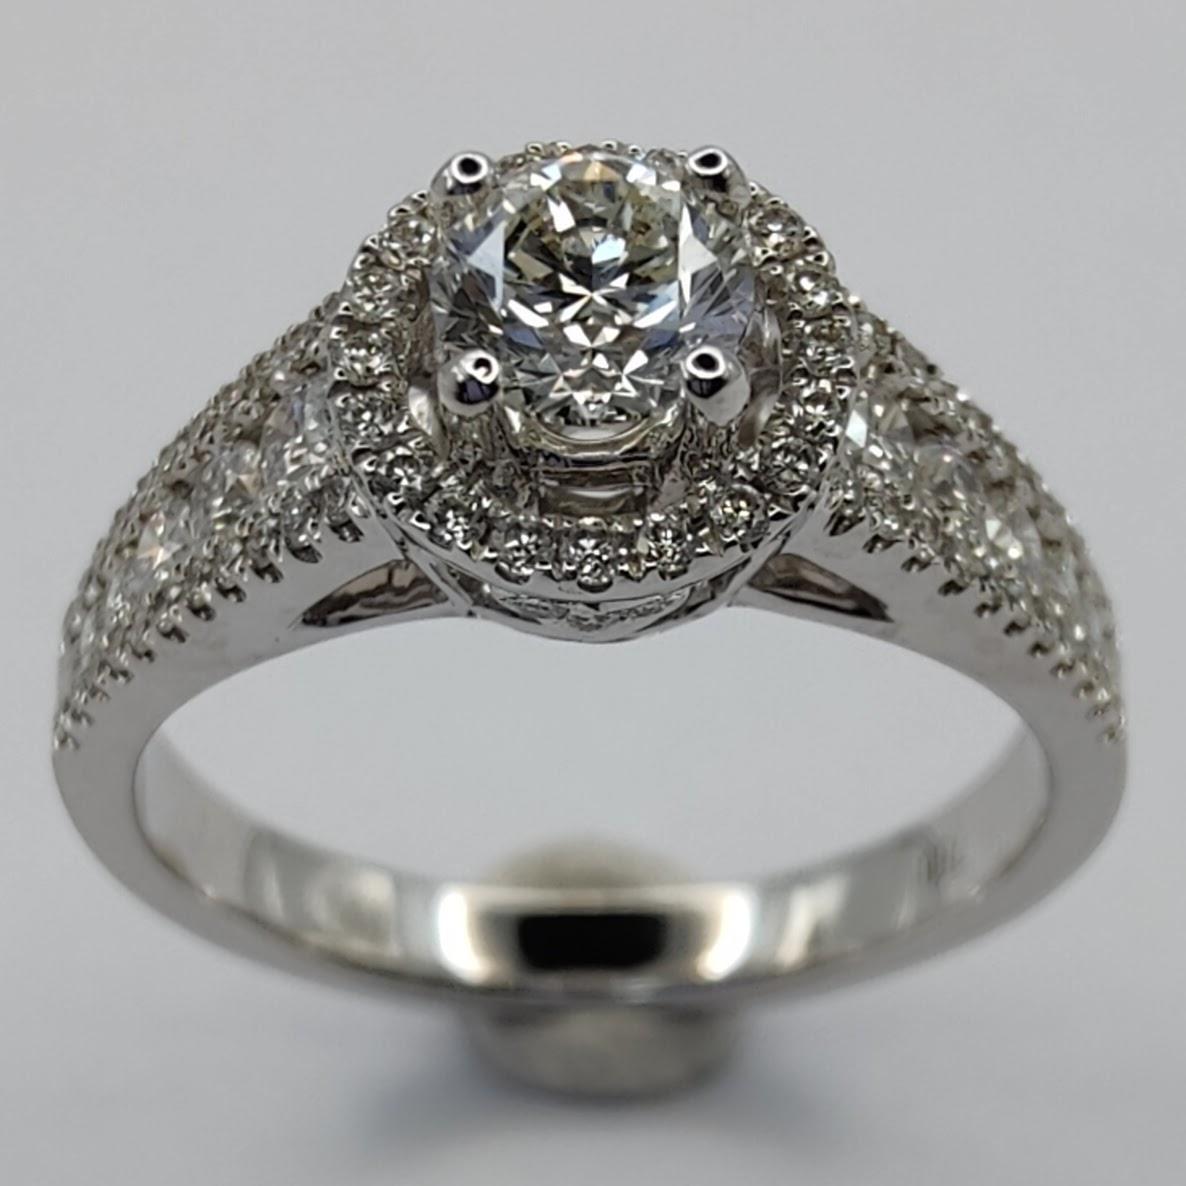 This stunning GIA certified diamond ring is the perfect choice for your special day. The ring features a sparkling 1 carat round cut diamond set in a cathedral pave design, surrounded by a halo of smaller diamonds. The ring is made of 18K white